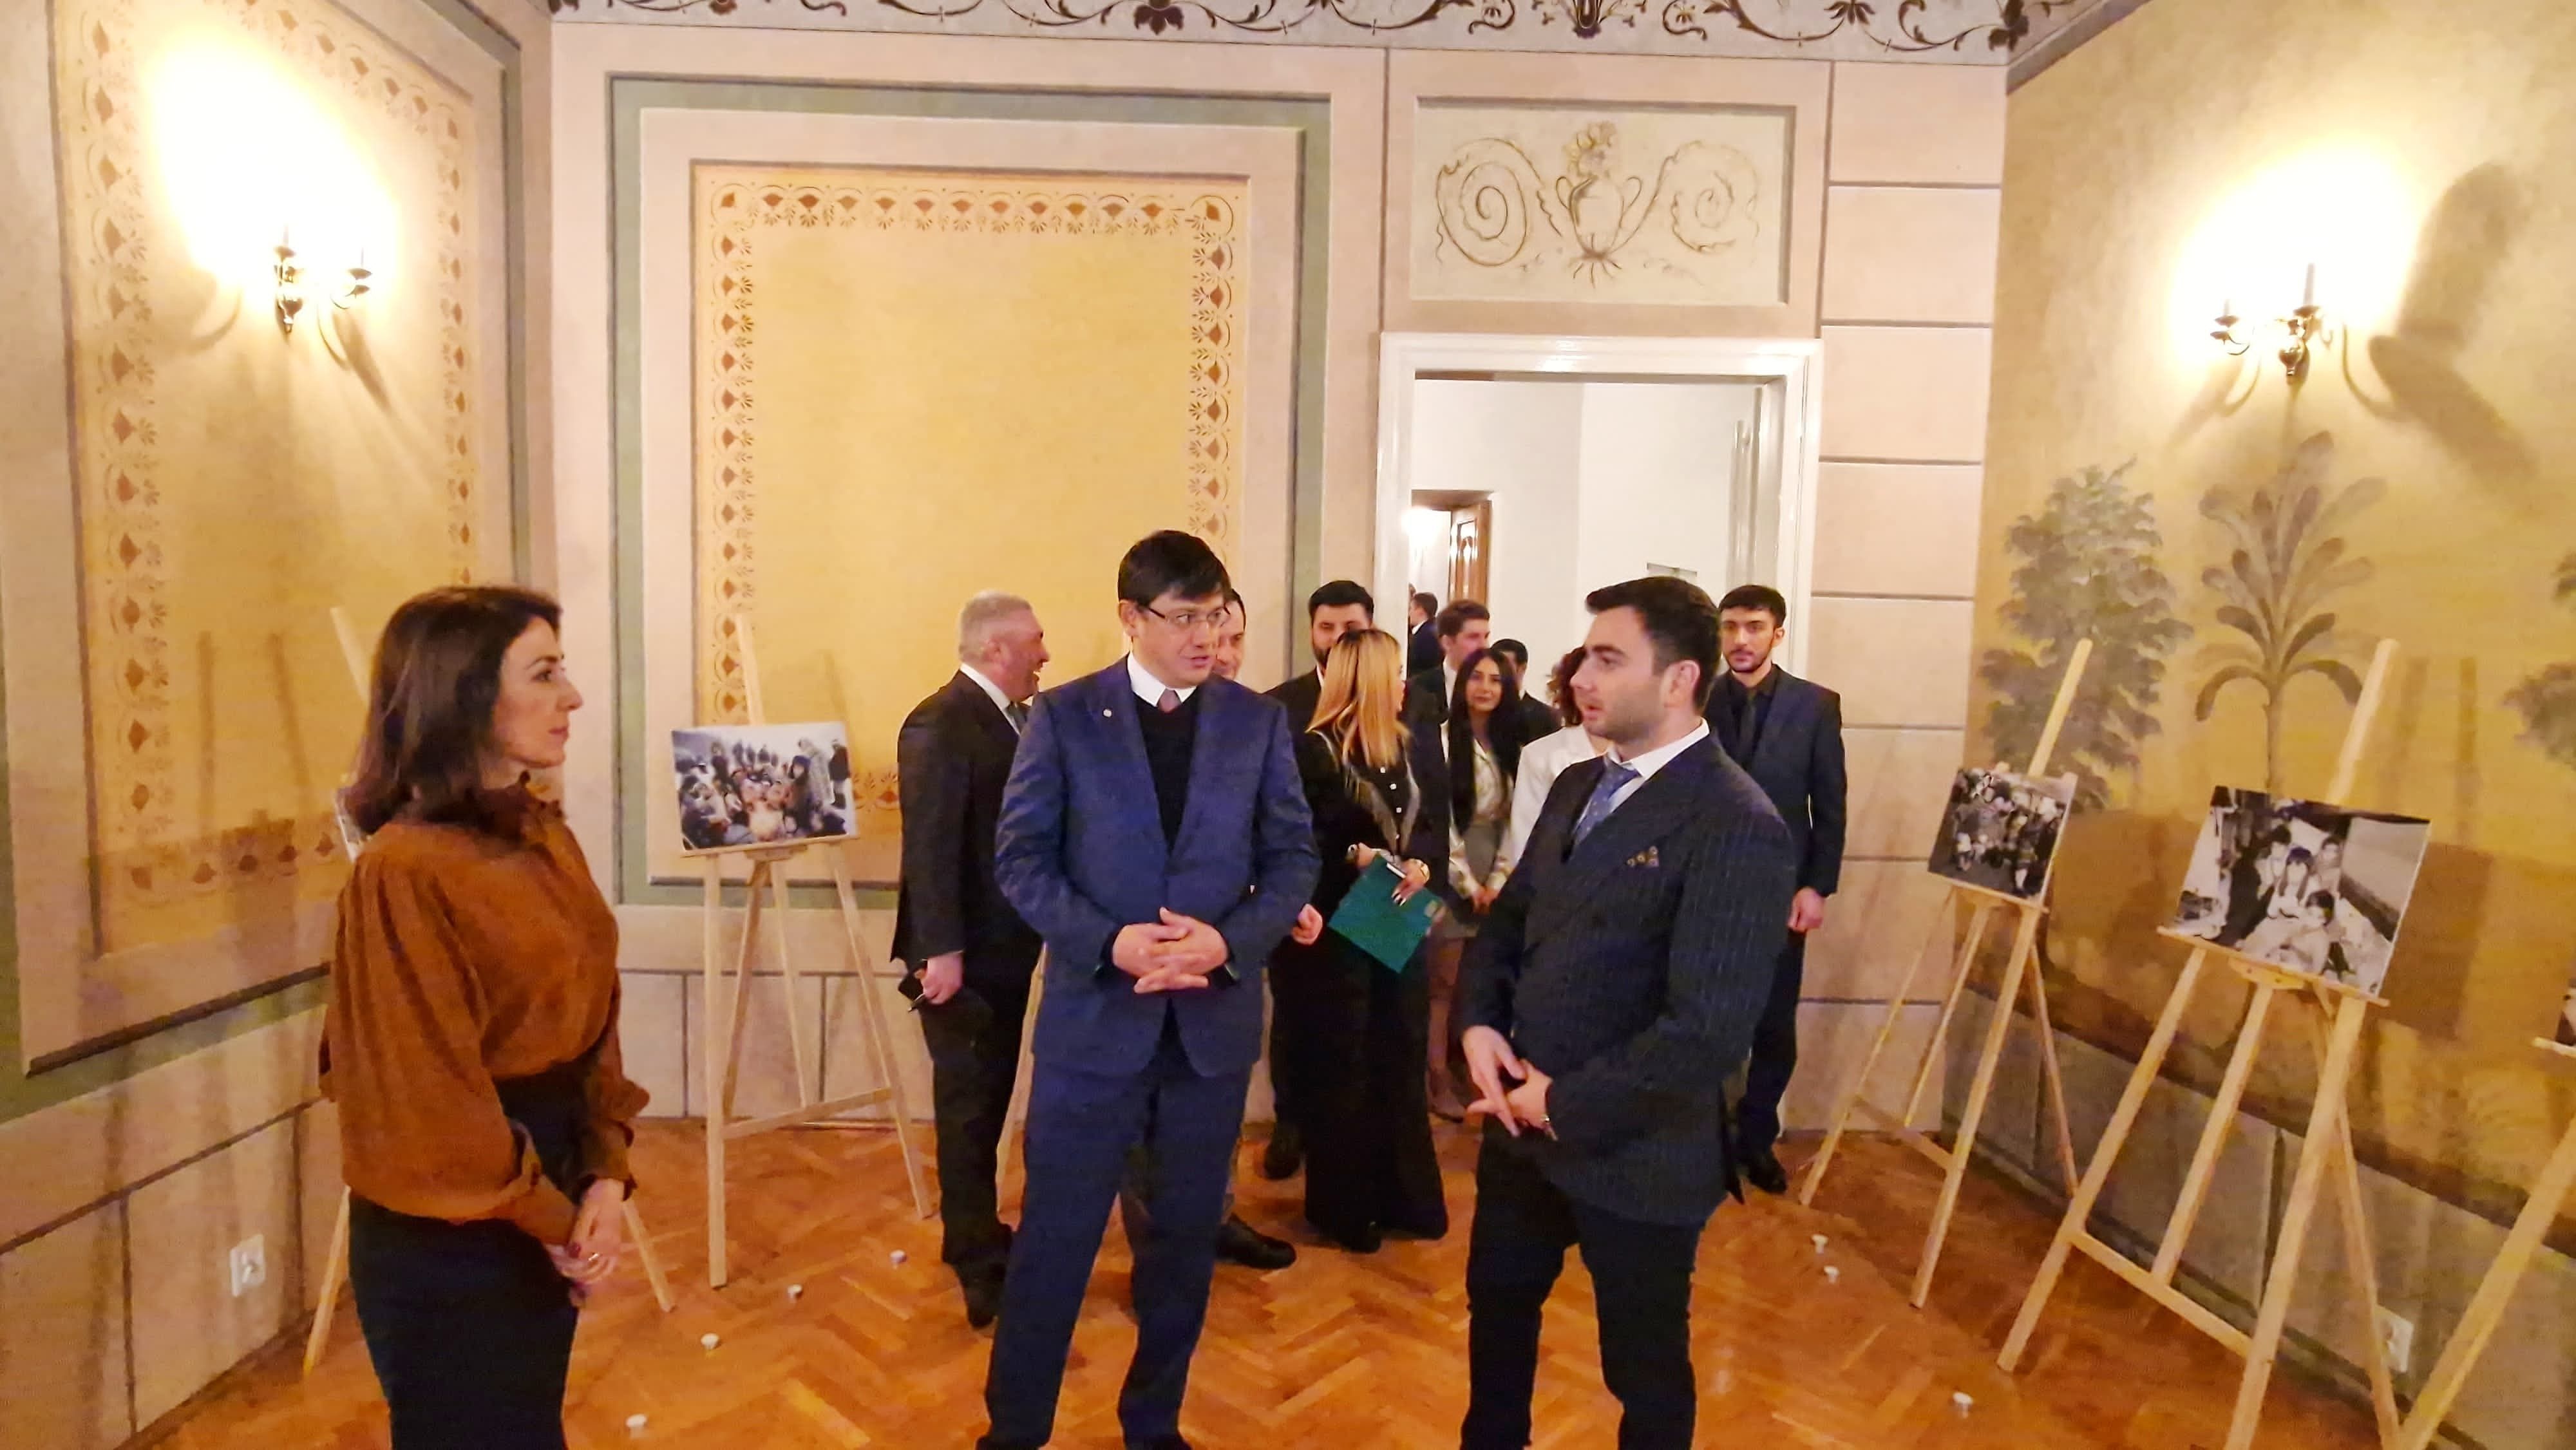 Krakow Azerbaijani House commemorates the victims of the Khojaly genocide 